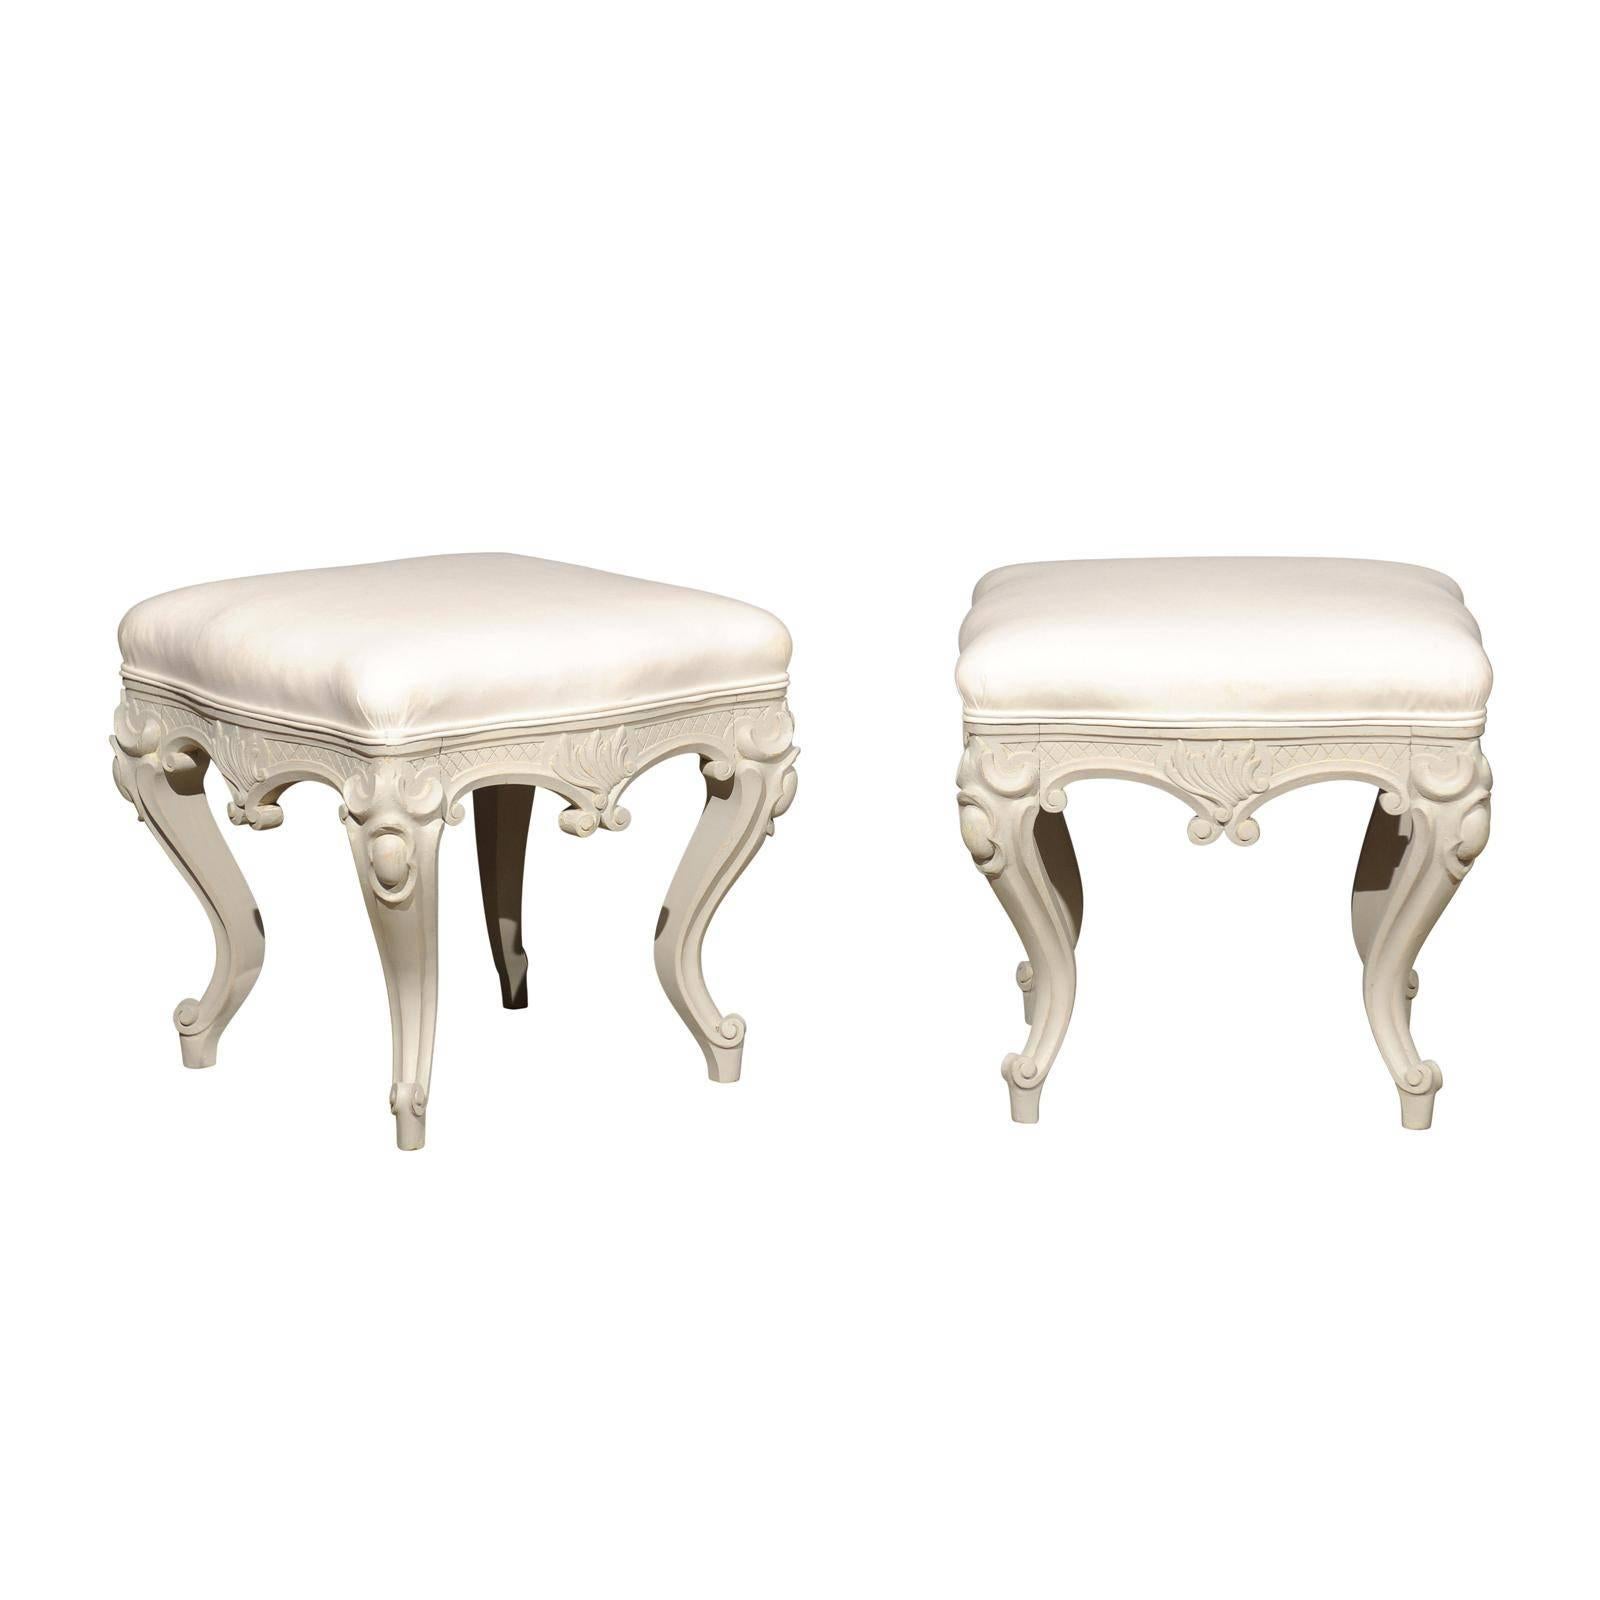 Pair of Swedish Rococo Style Carved Painted Upholstered Stools, circa 1890 For Sale